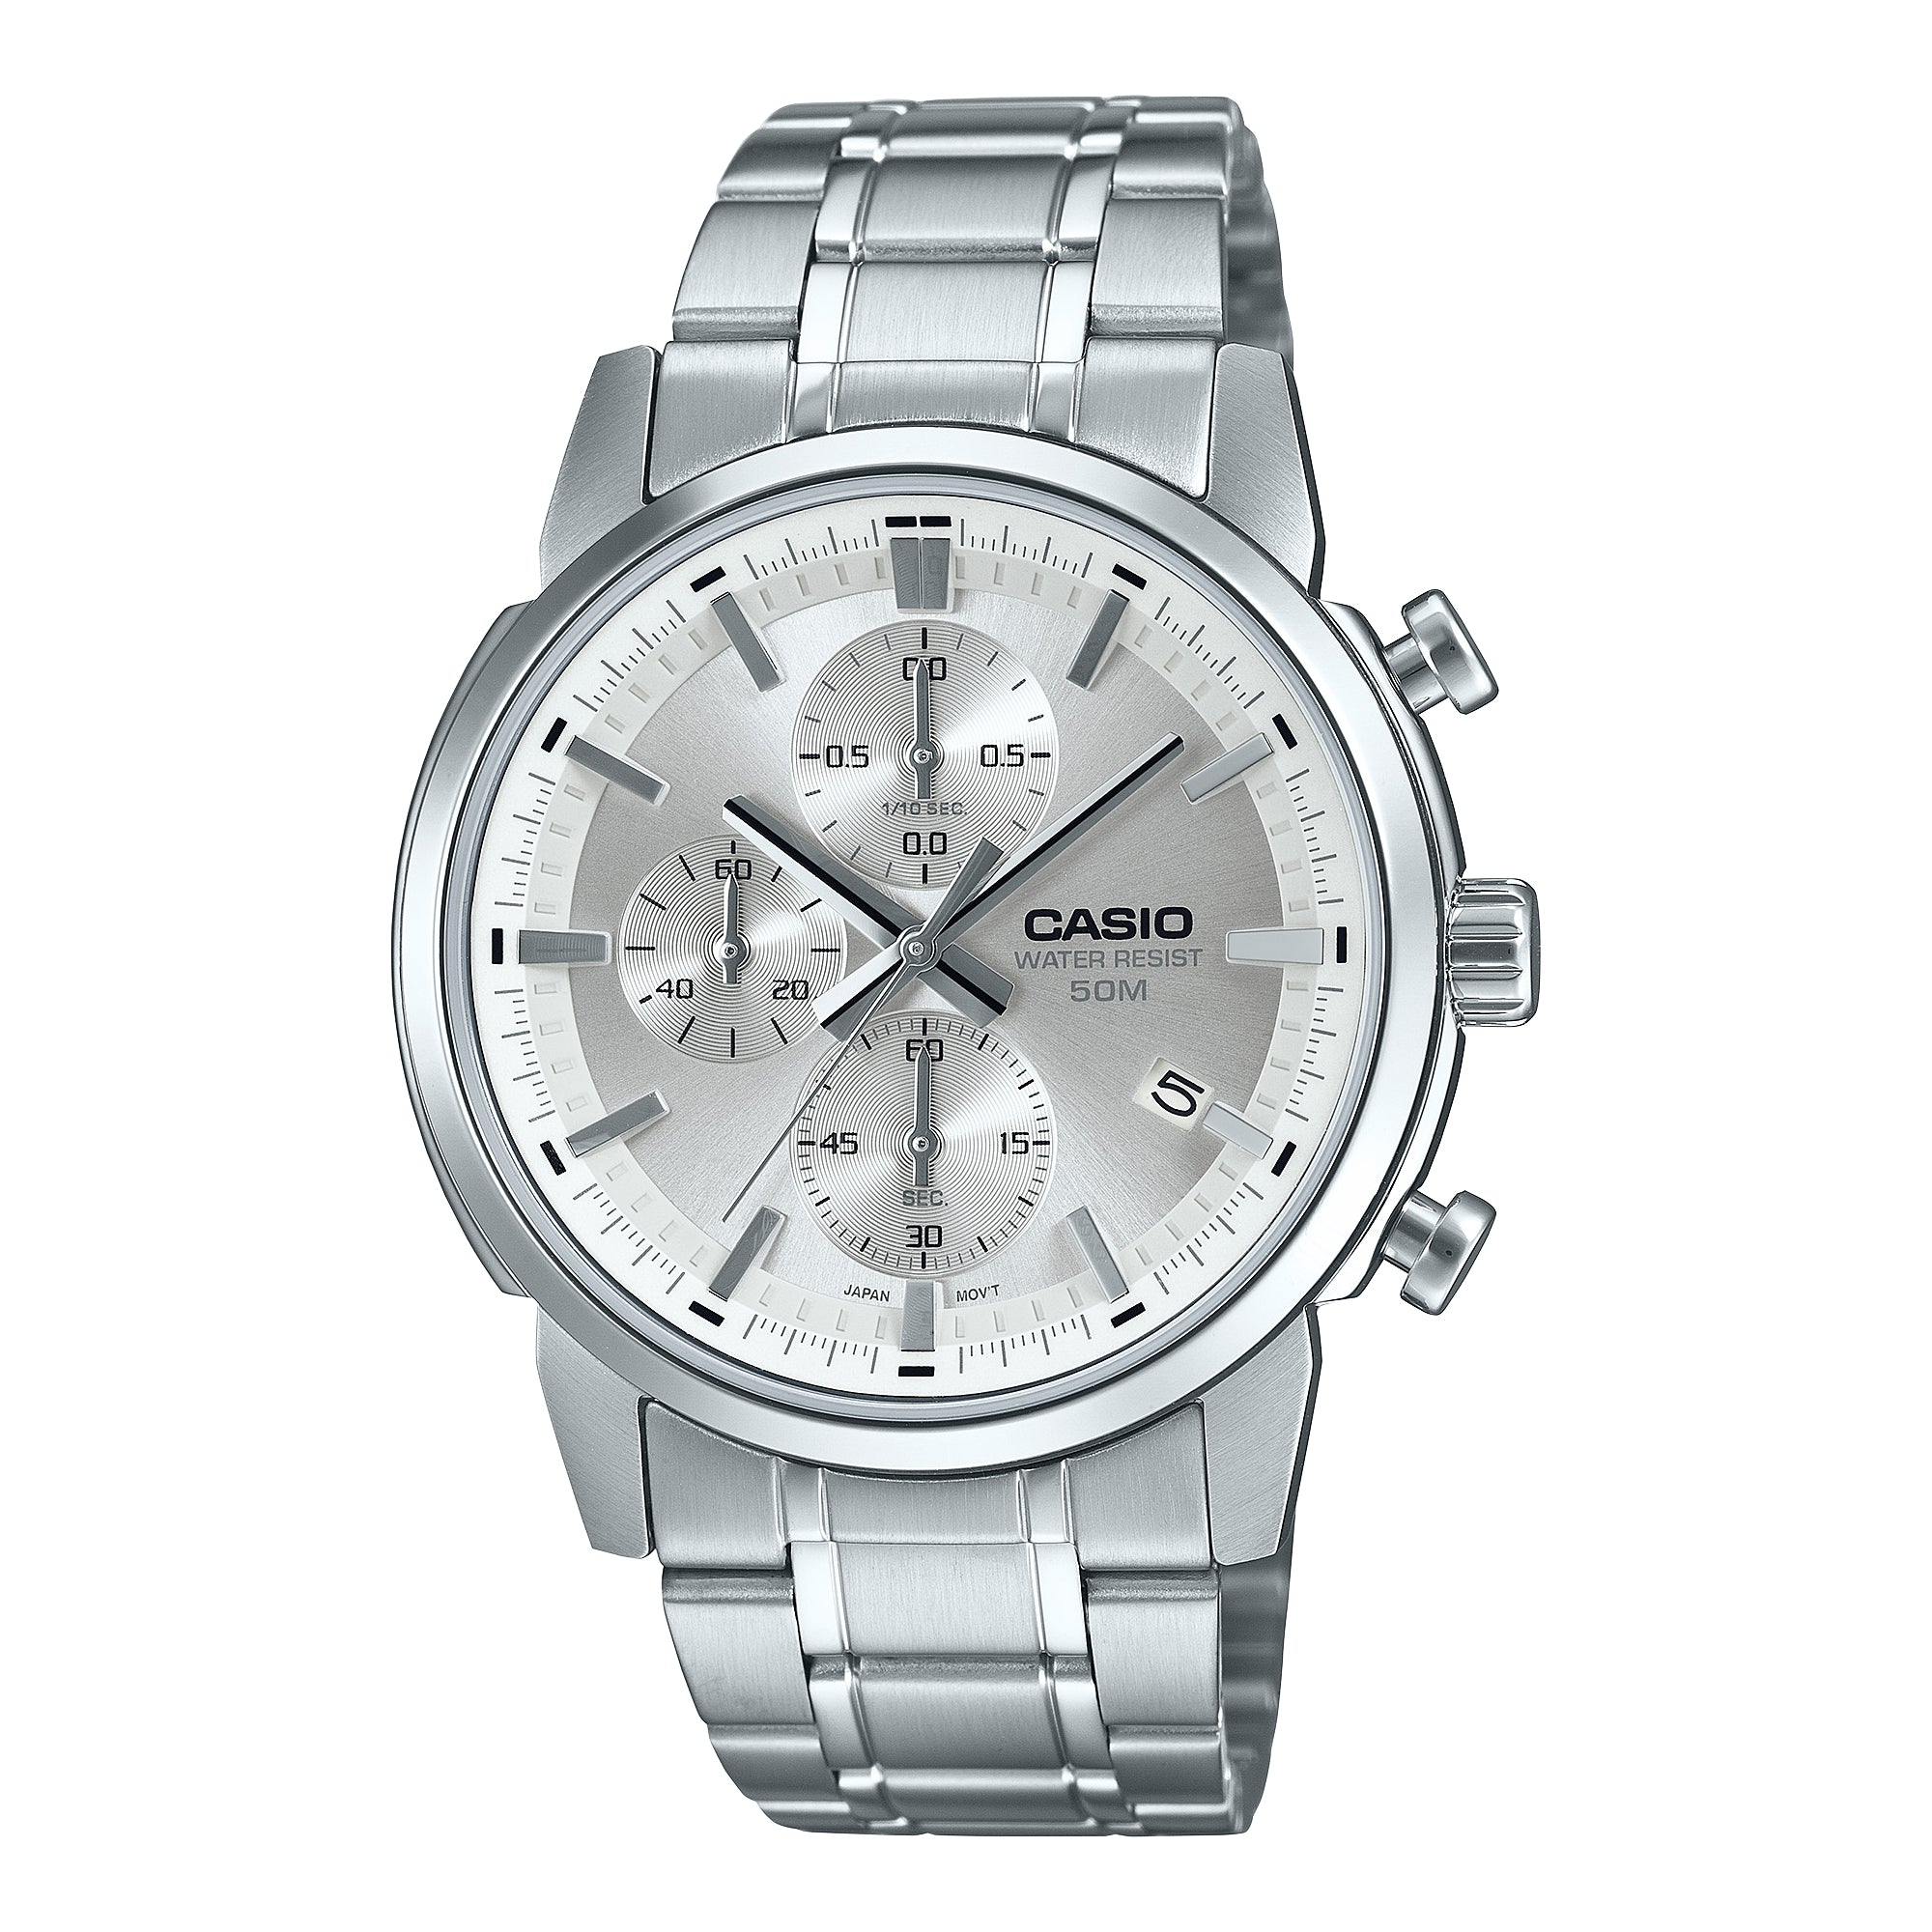 Casio Men's Analog Sporty Chronograph Stainless Steel Band Watch MTPE510D-7A MTP-E510D-7A